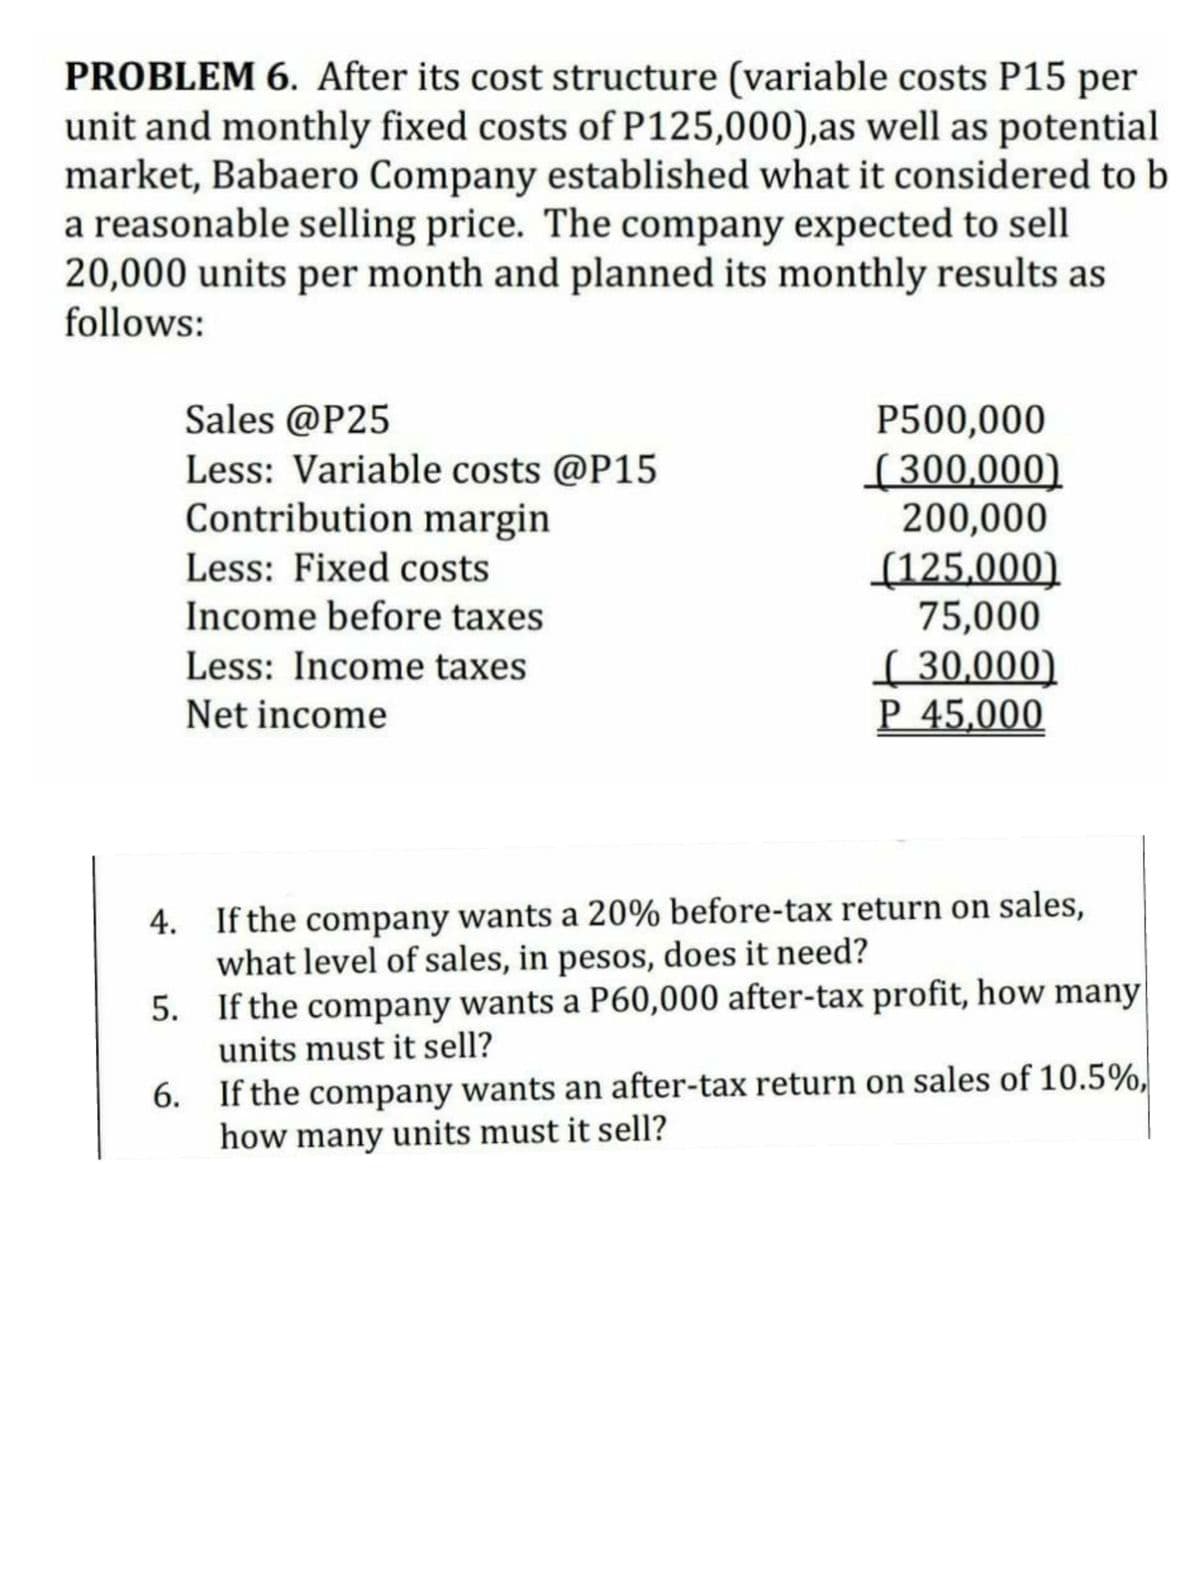 PROBLEM 6. After its cost structure (variable costs P15 per
unit and monthly fixed costs of P125,000),as well as potential
market, Babaero Company established what it considered to b
a reasonable selling price. The company expected to sell
20,000 units per month and planned its monthly results as
follows:
Sales @P25
Less: Variable costs @P15
Contribution margin
P500,000
[300,000)
200,000
(125,000)
75,000
( 30,000)
P 45,000
Less: Fixed costs
Income before taxes
Less: Income taxes
Net income
4. If the company wants a 20% before-tax return on sales,
what level of sales, in pesos, does it need?
5. If the company wants a P60,000 after-tax profit, how many
units must it sell?
6. If the company wants an after-tax return on sales of 10.5%,
how many units must it sell?
